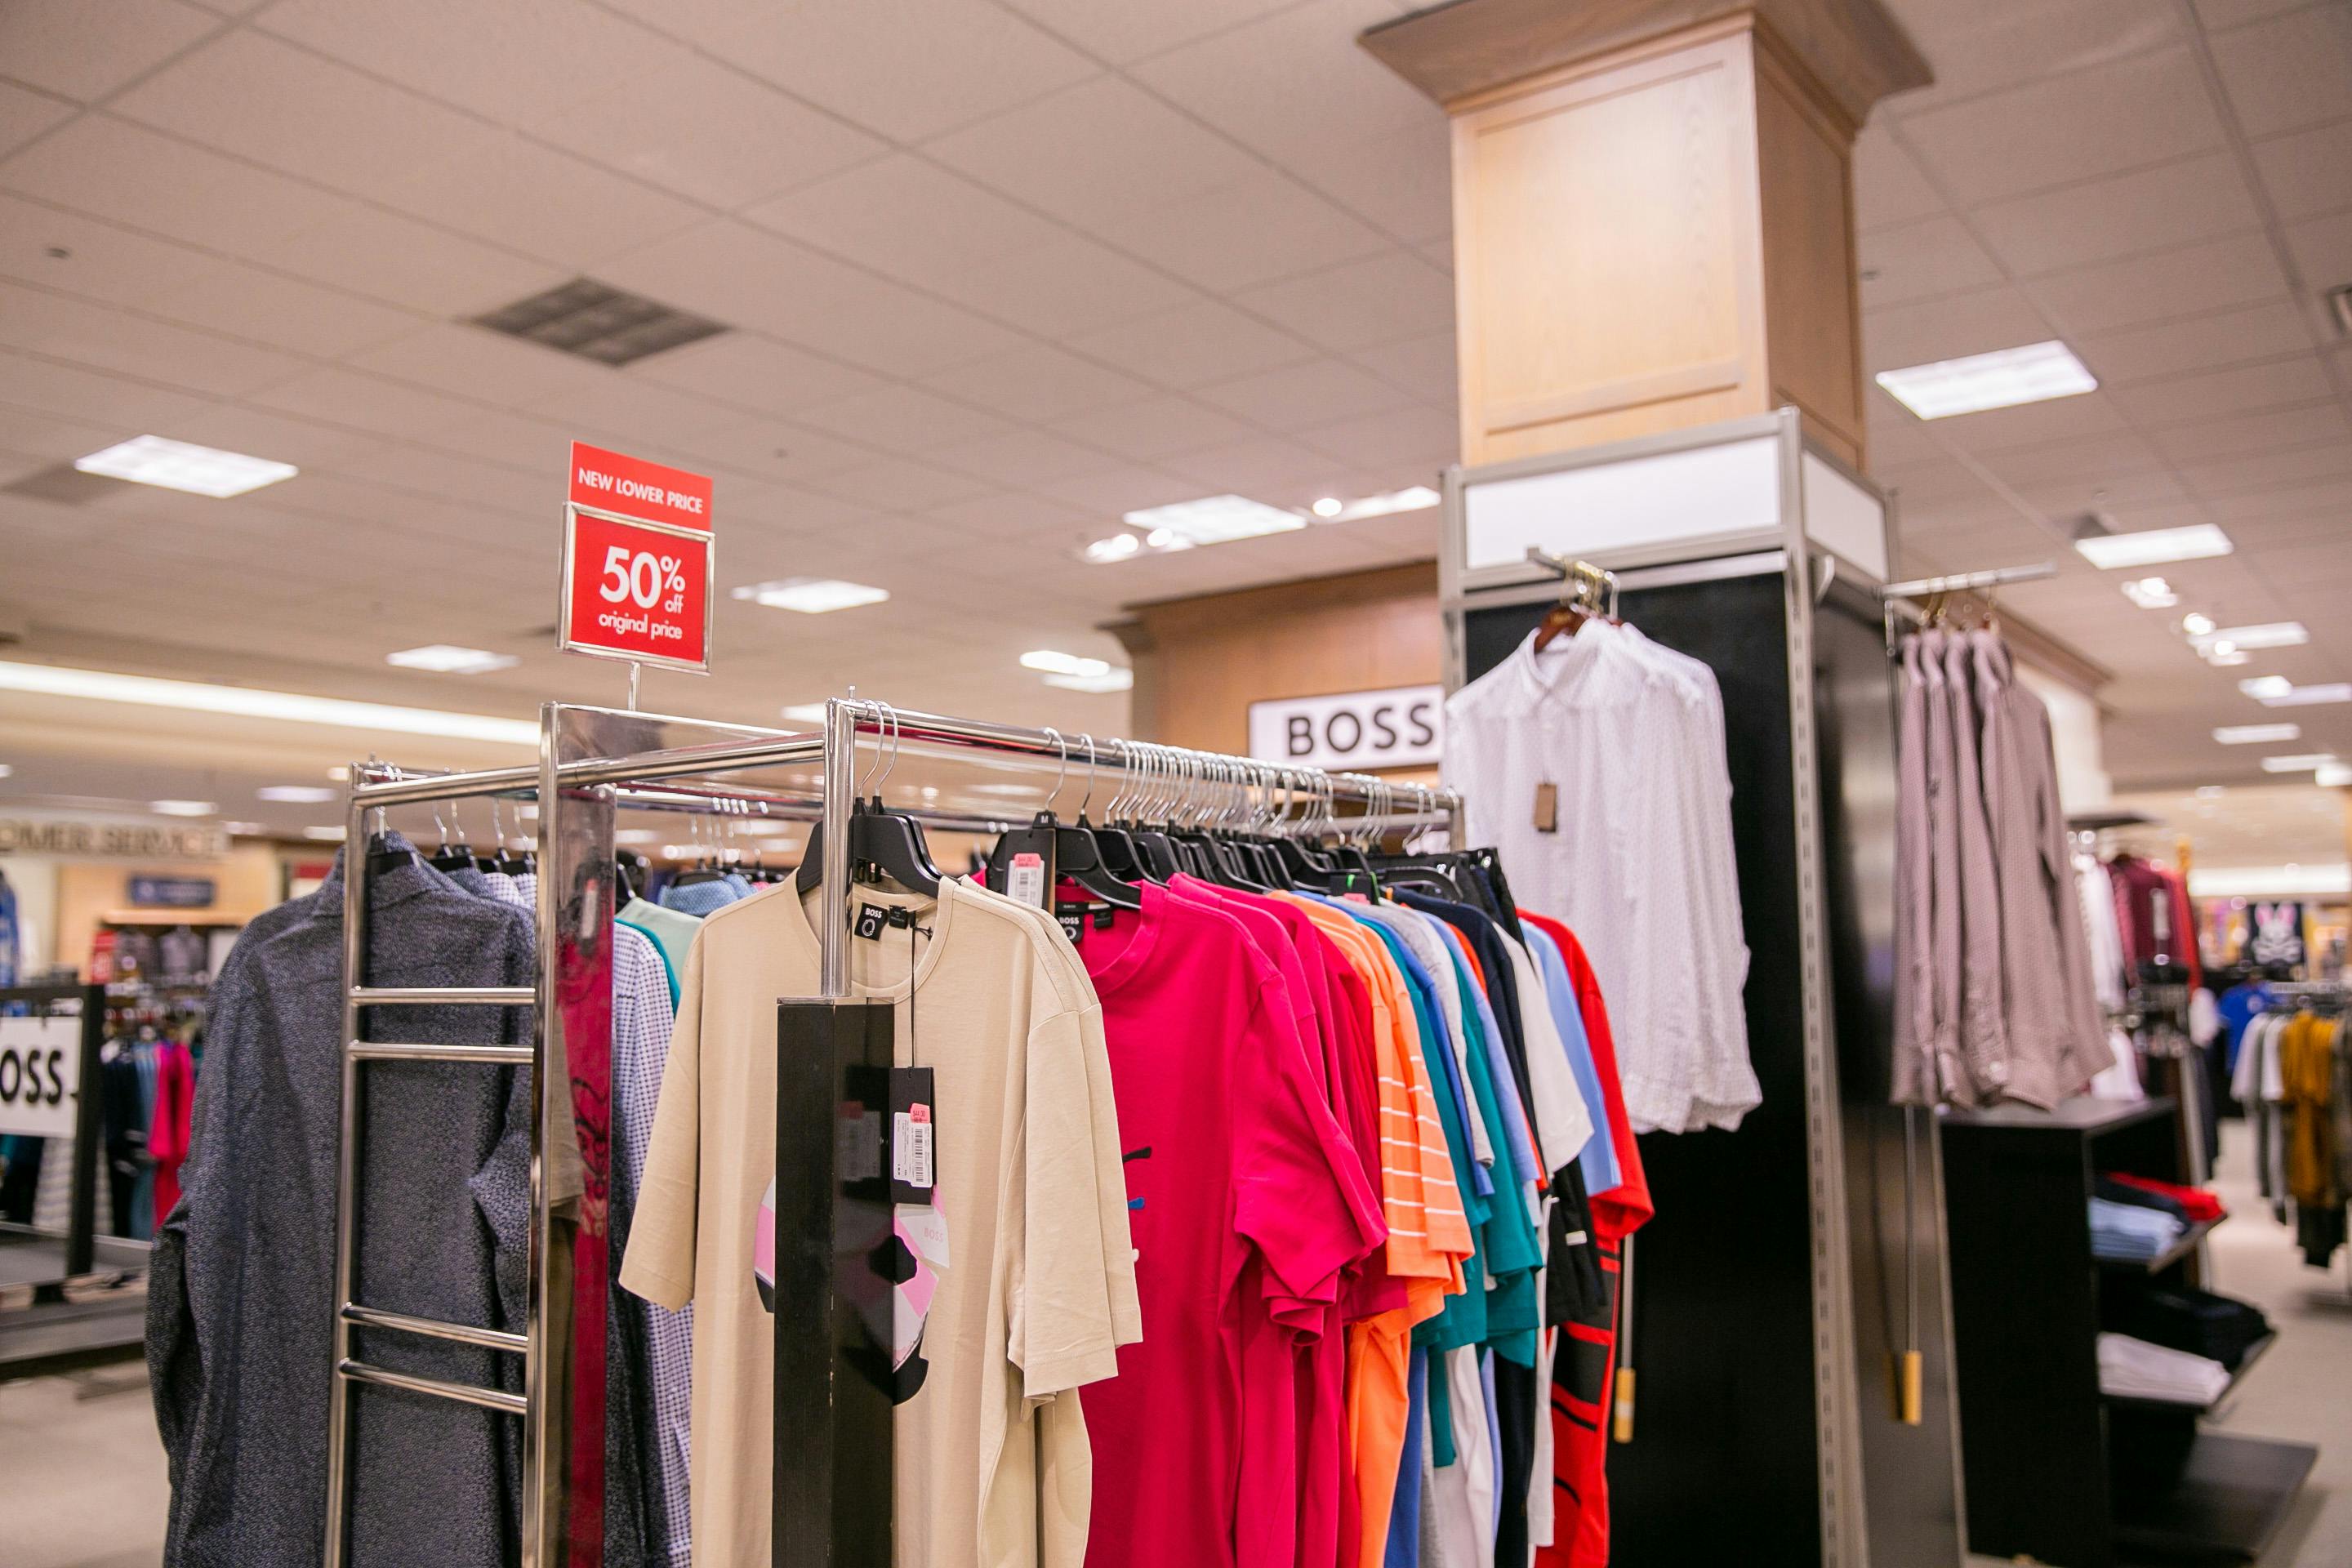 Dillard's New Year's Sale: Is It On For 2023? - The Krazy Coupon Lady